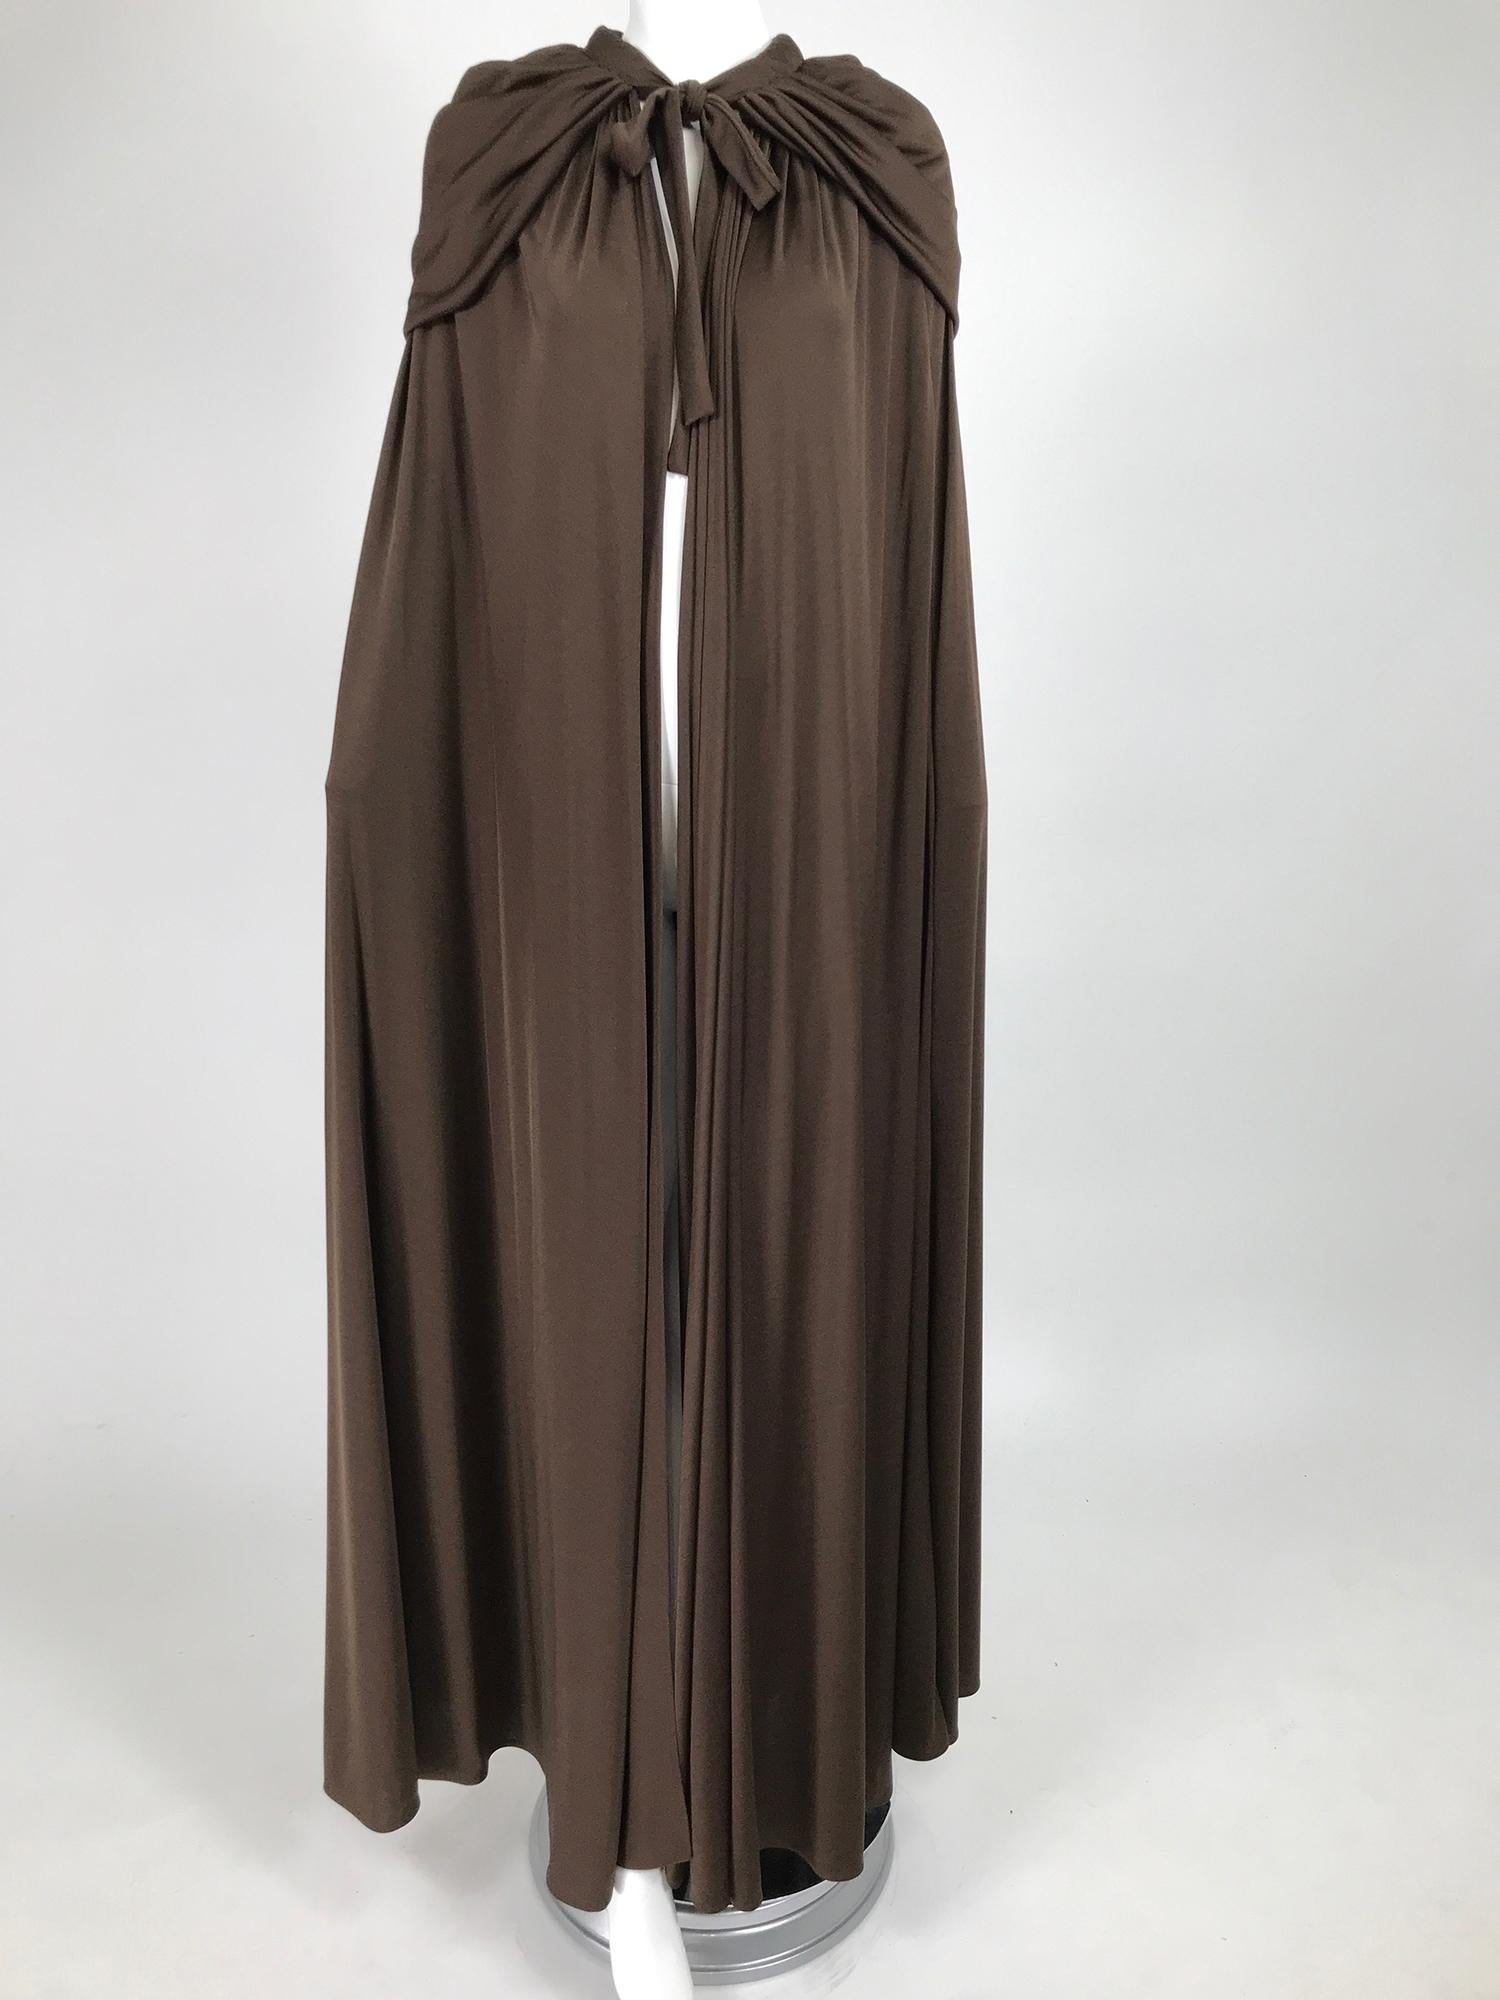 Loris Azzaro Couture chocolate brown silky jersey full length hooded cape from the 1970s. Super model length, this bias cut cape is the perfect addition to any big night. Silky jersey that is very full and dramatic. The cape ties at the neck front,